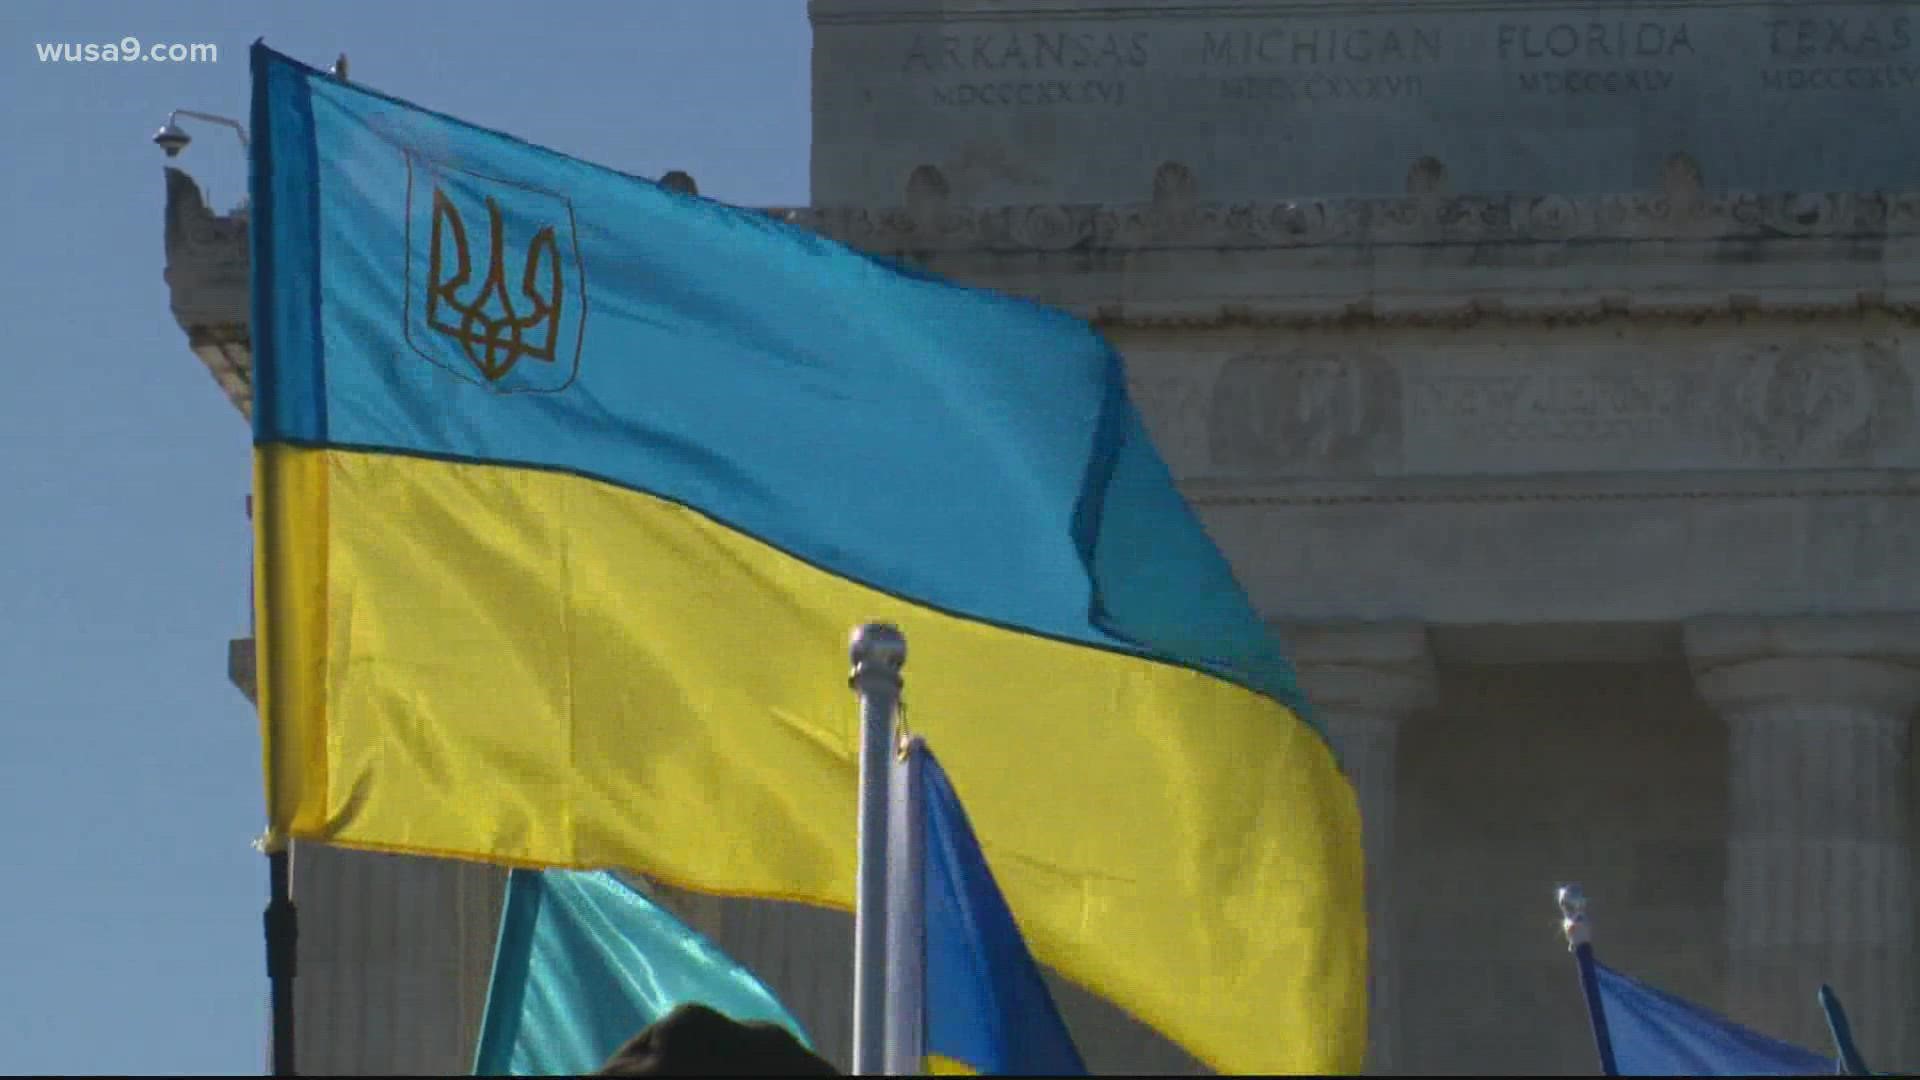 Hundreds rally in DC in support of Ukraine and call for peace